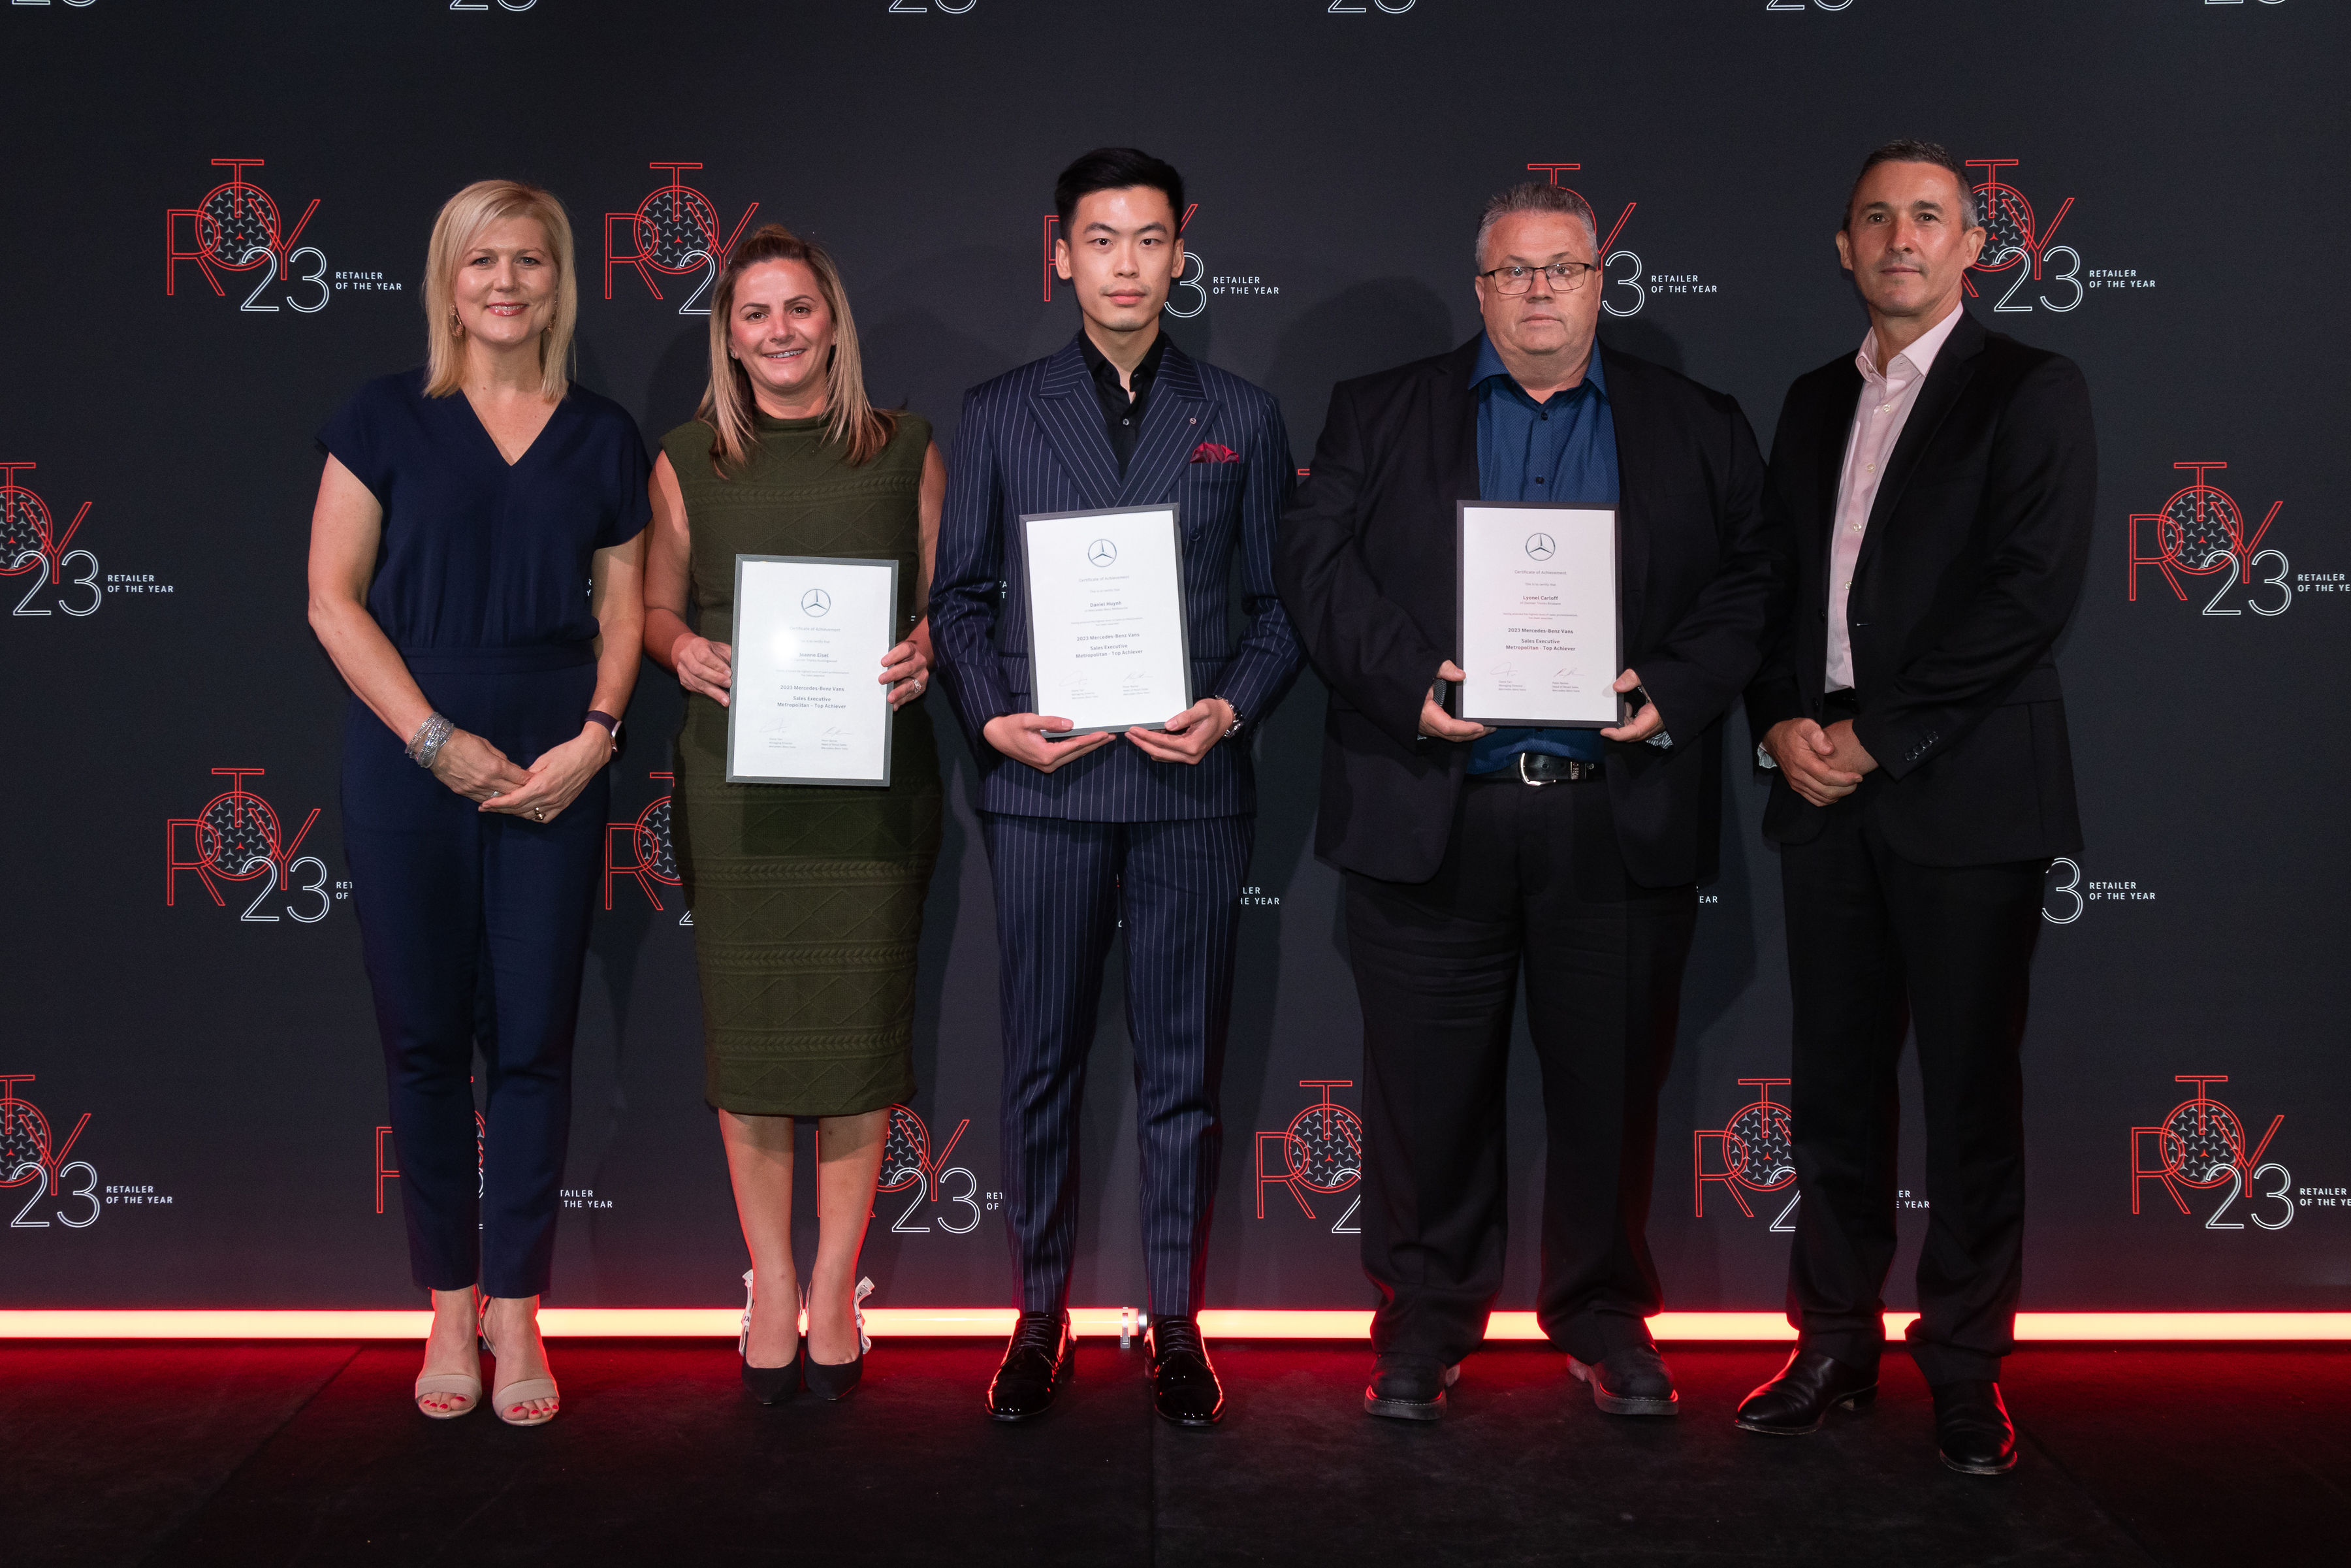 Joanne Eisel and Lyonel Carloff win at Mercedes-Benz Vans Awards night for 2023